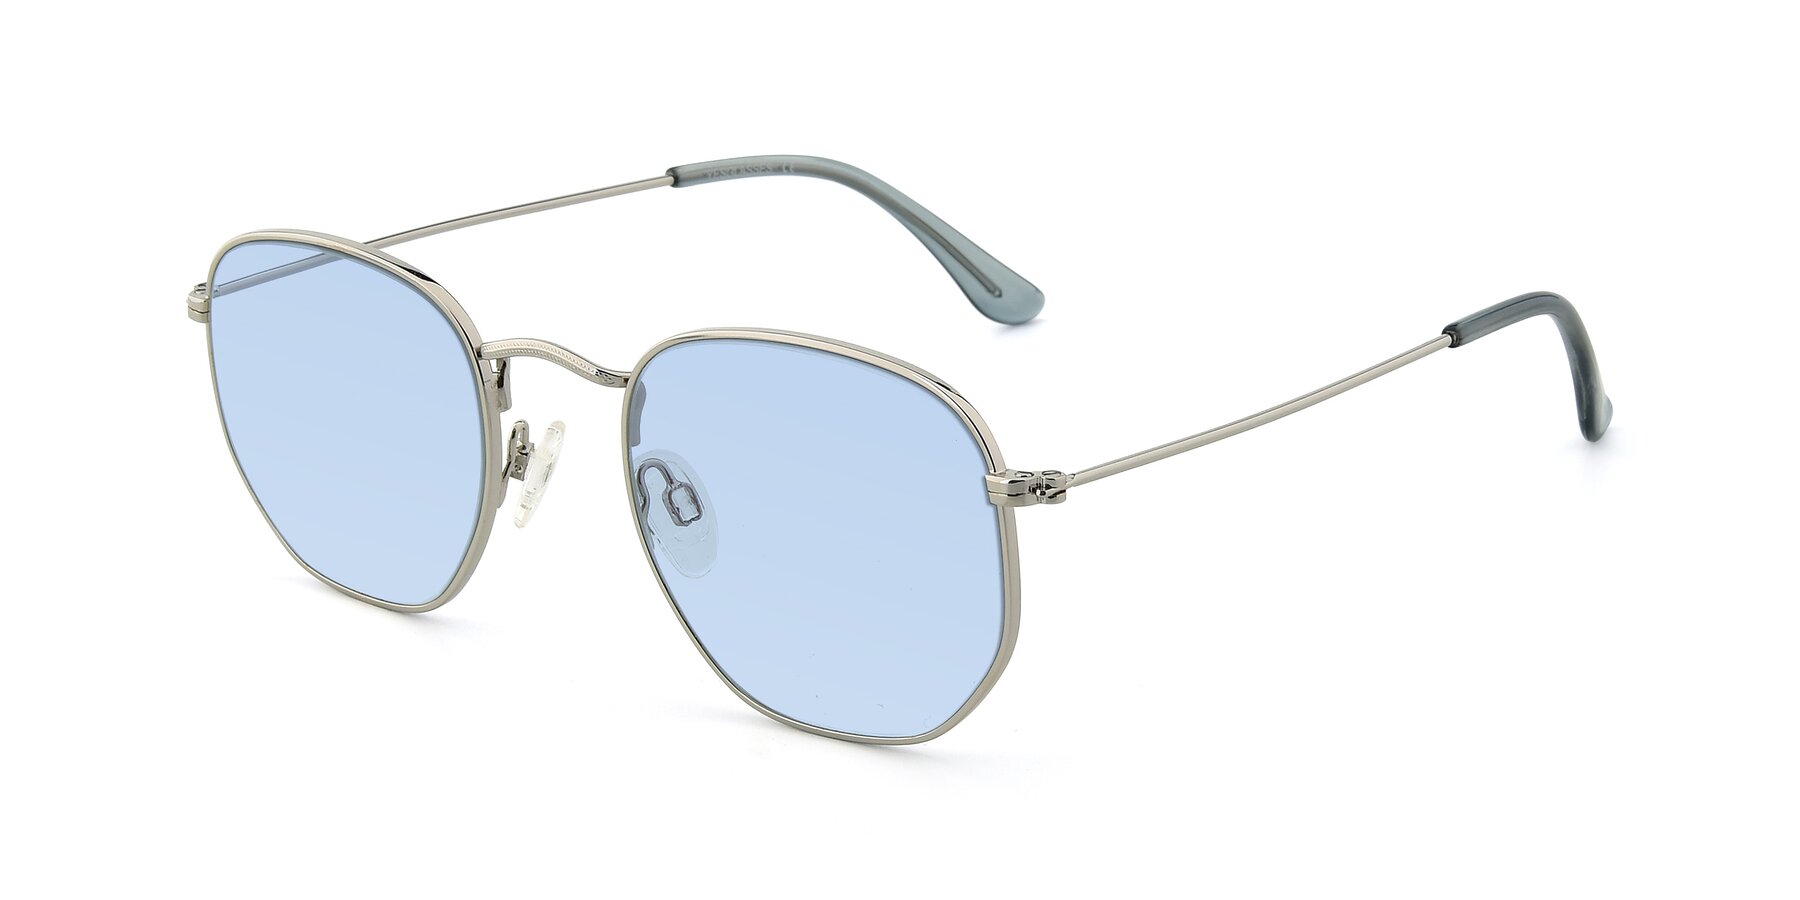 Angle of SSR1943 in Silver with Light Blue Tinted Lenses